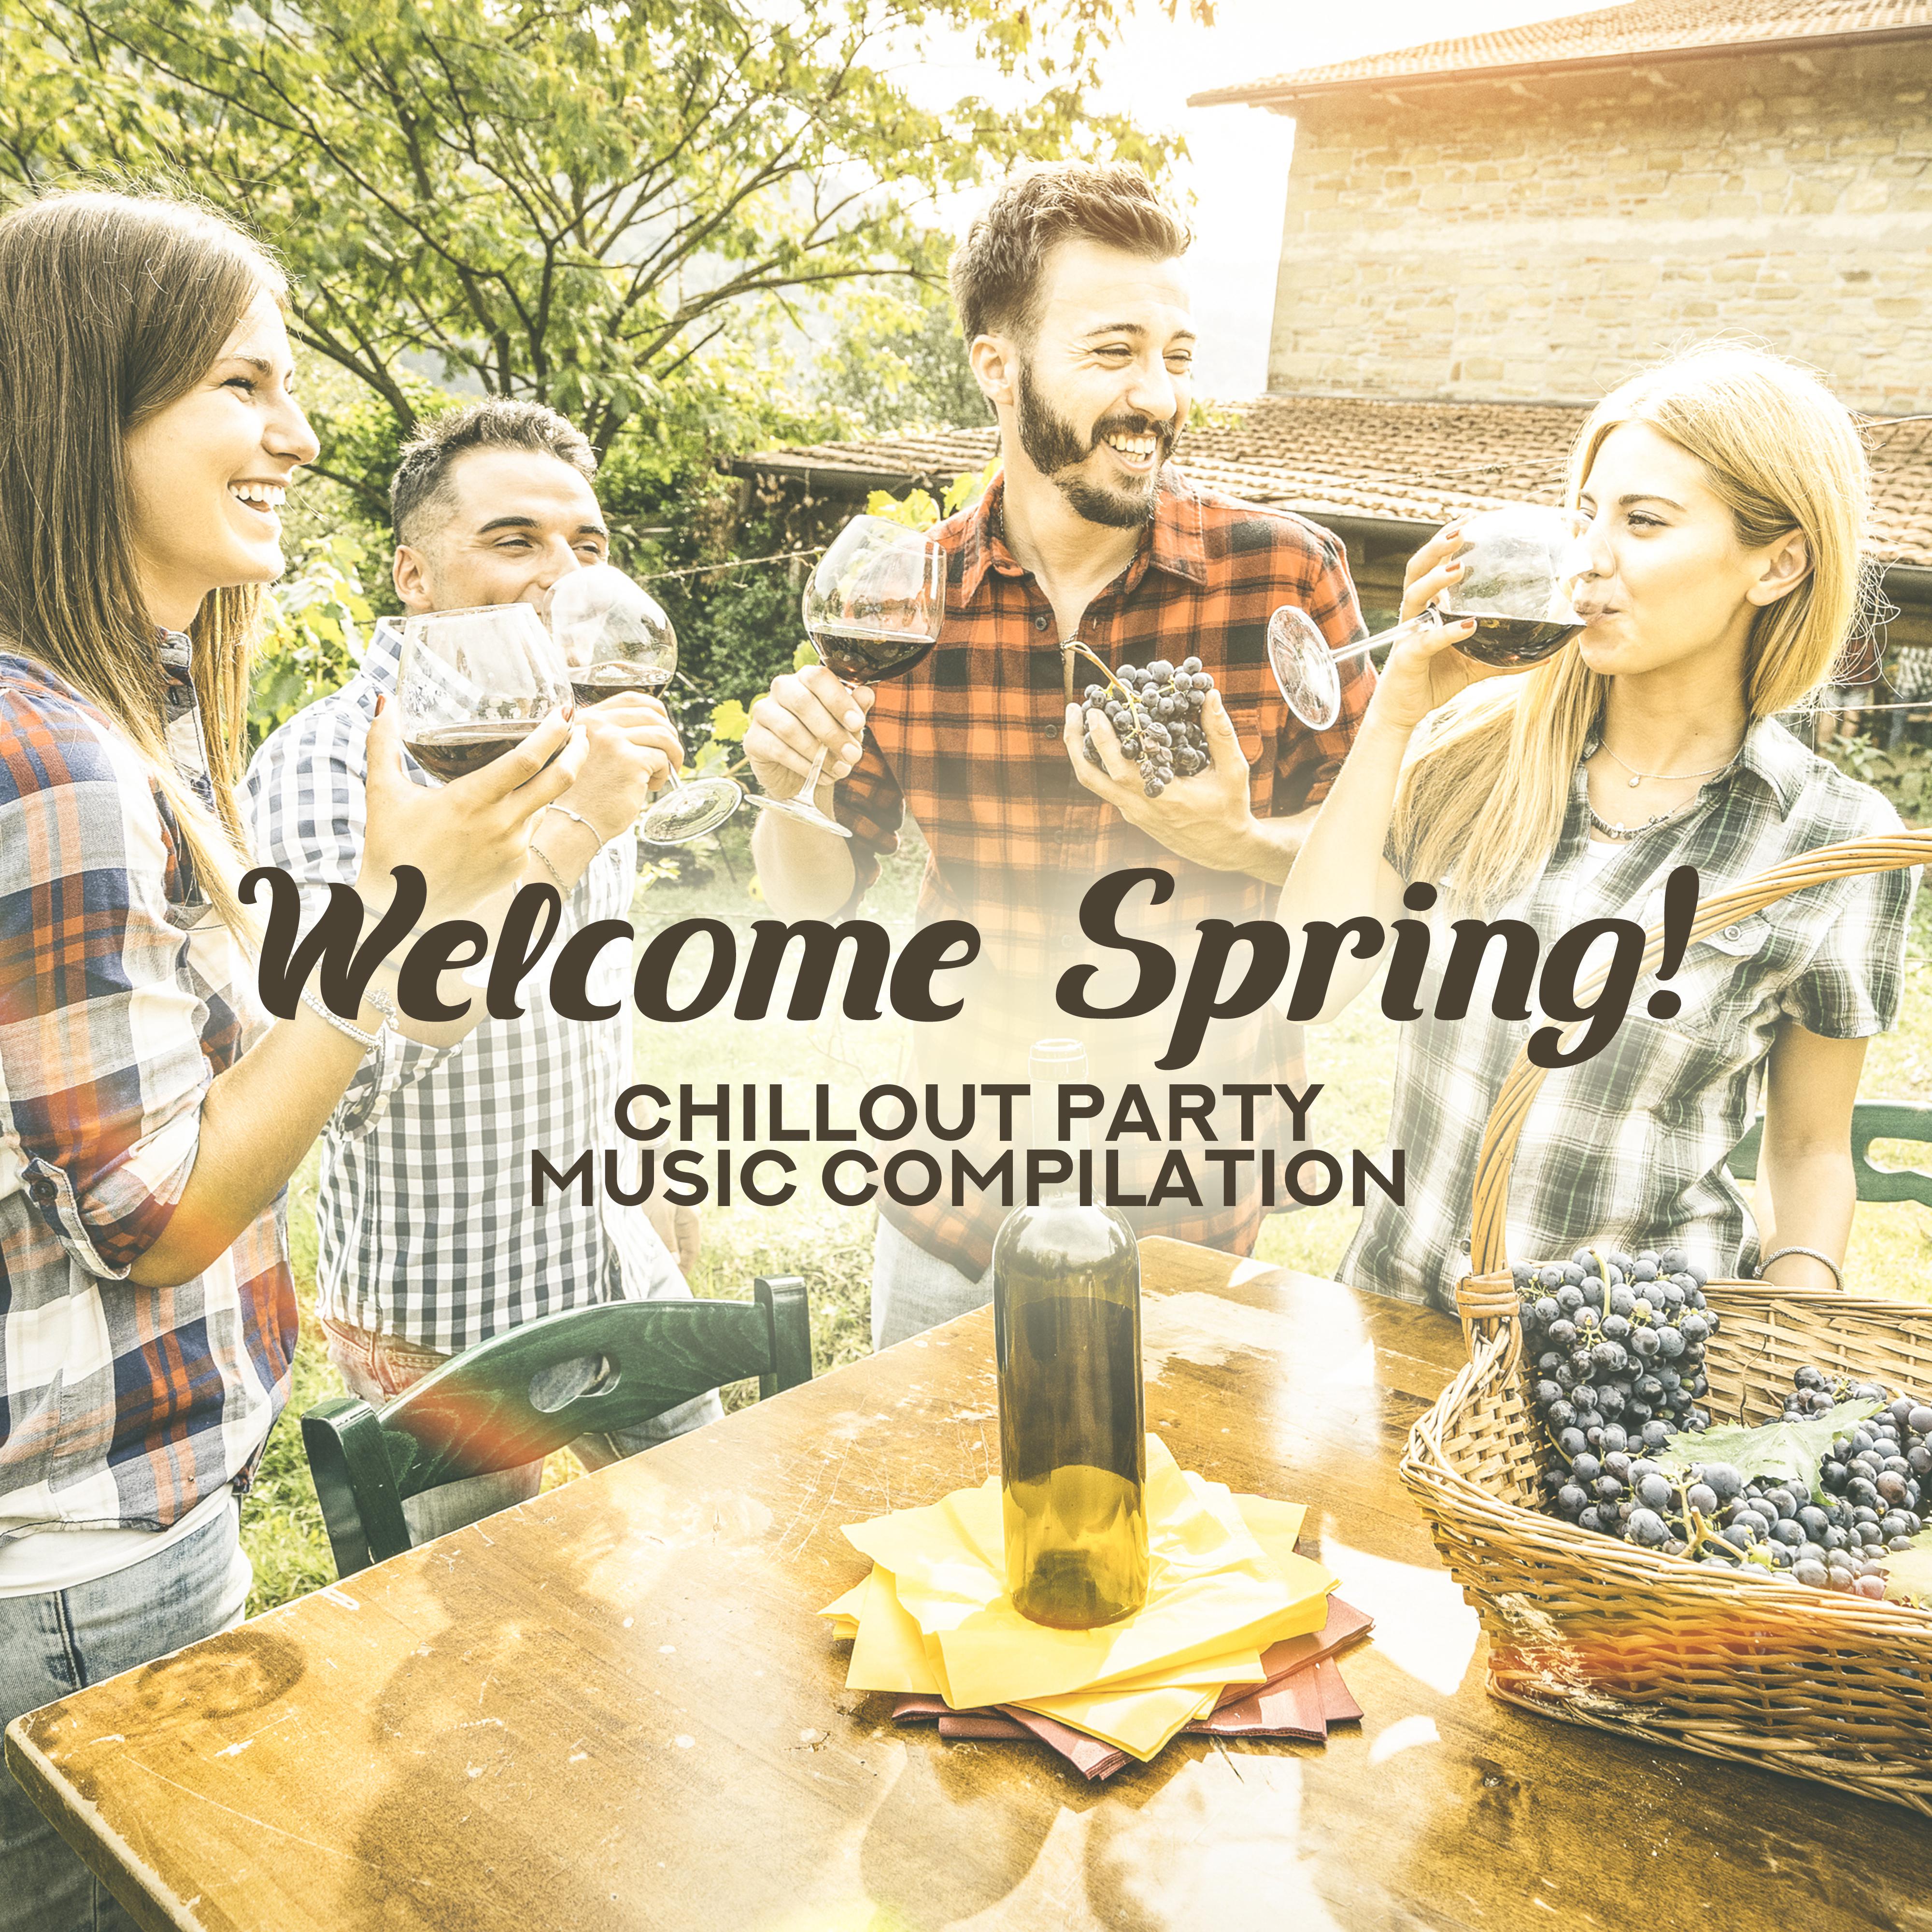 Welcome Spring! - Chillout Party Music Compilation